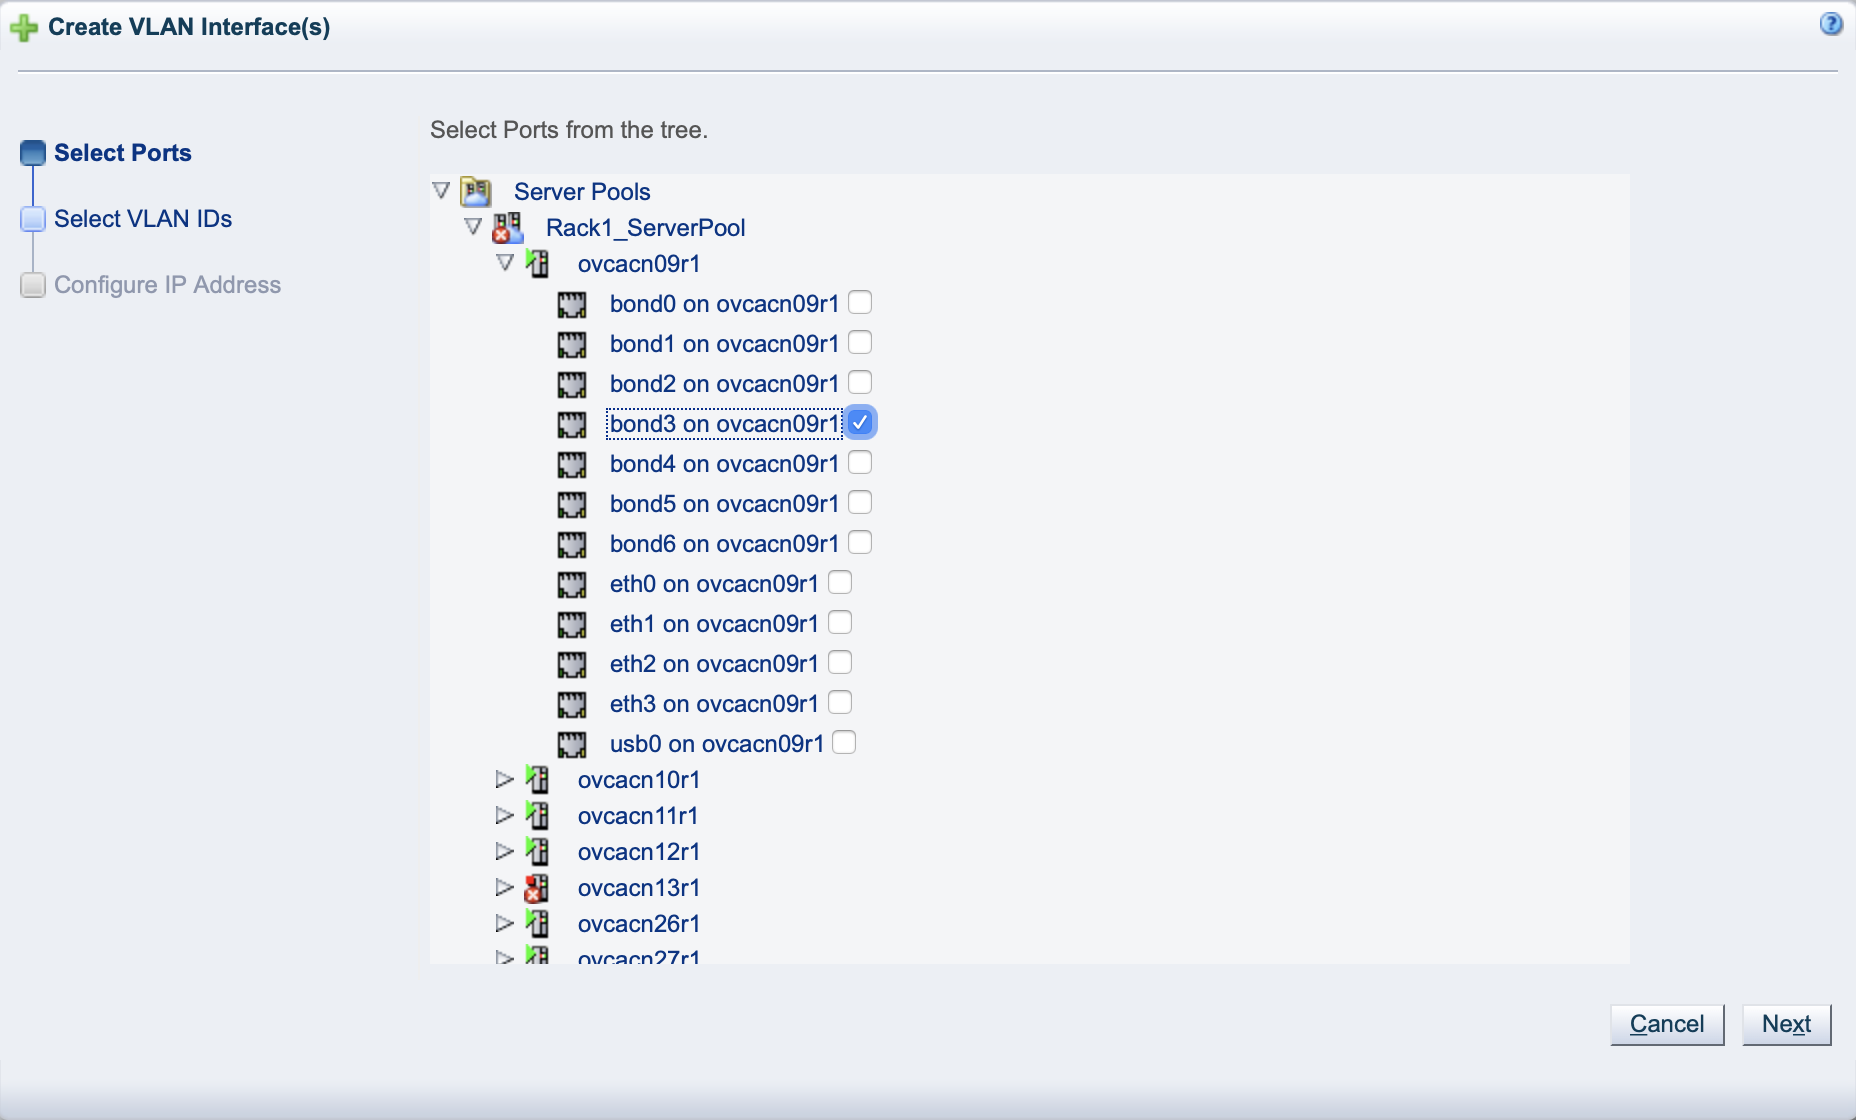 Screenshot showing the Select Port page of the Create VLAN Interfaces wizard.